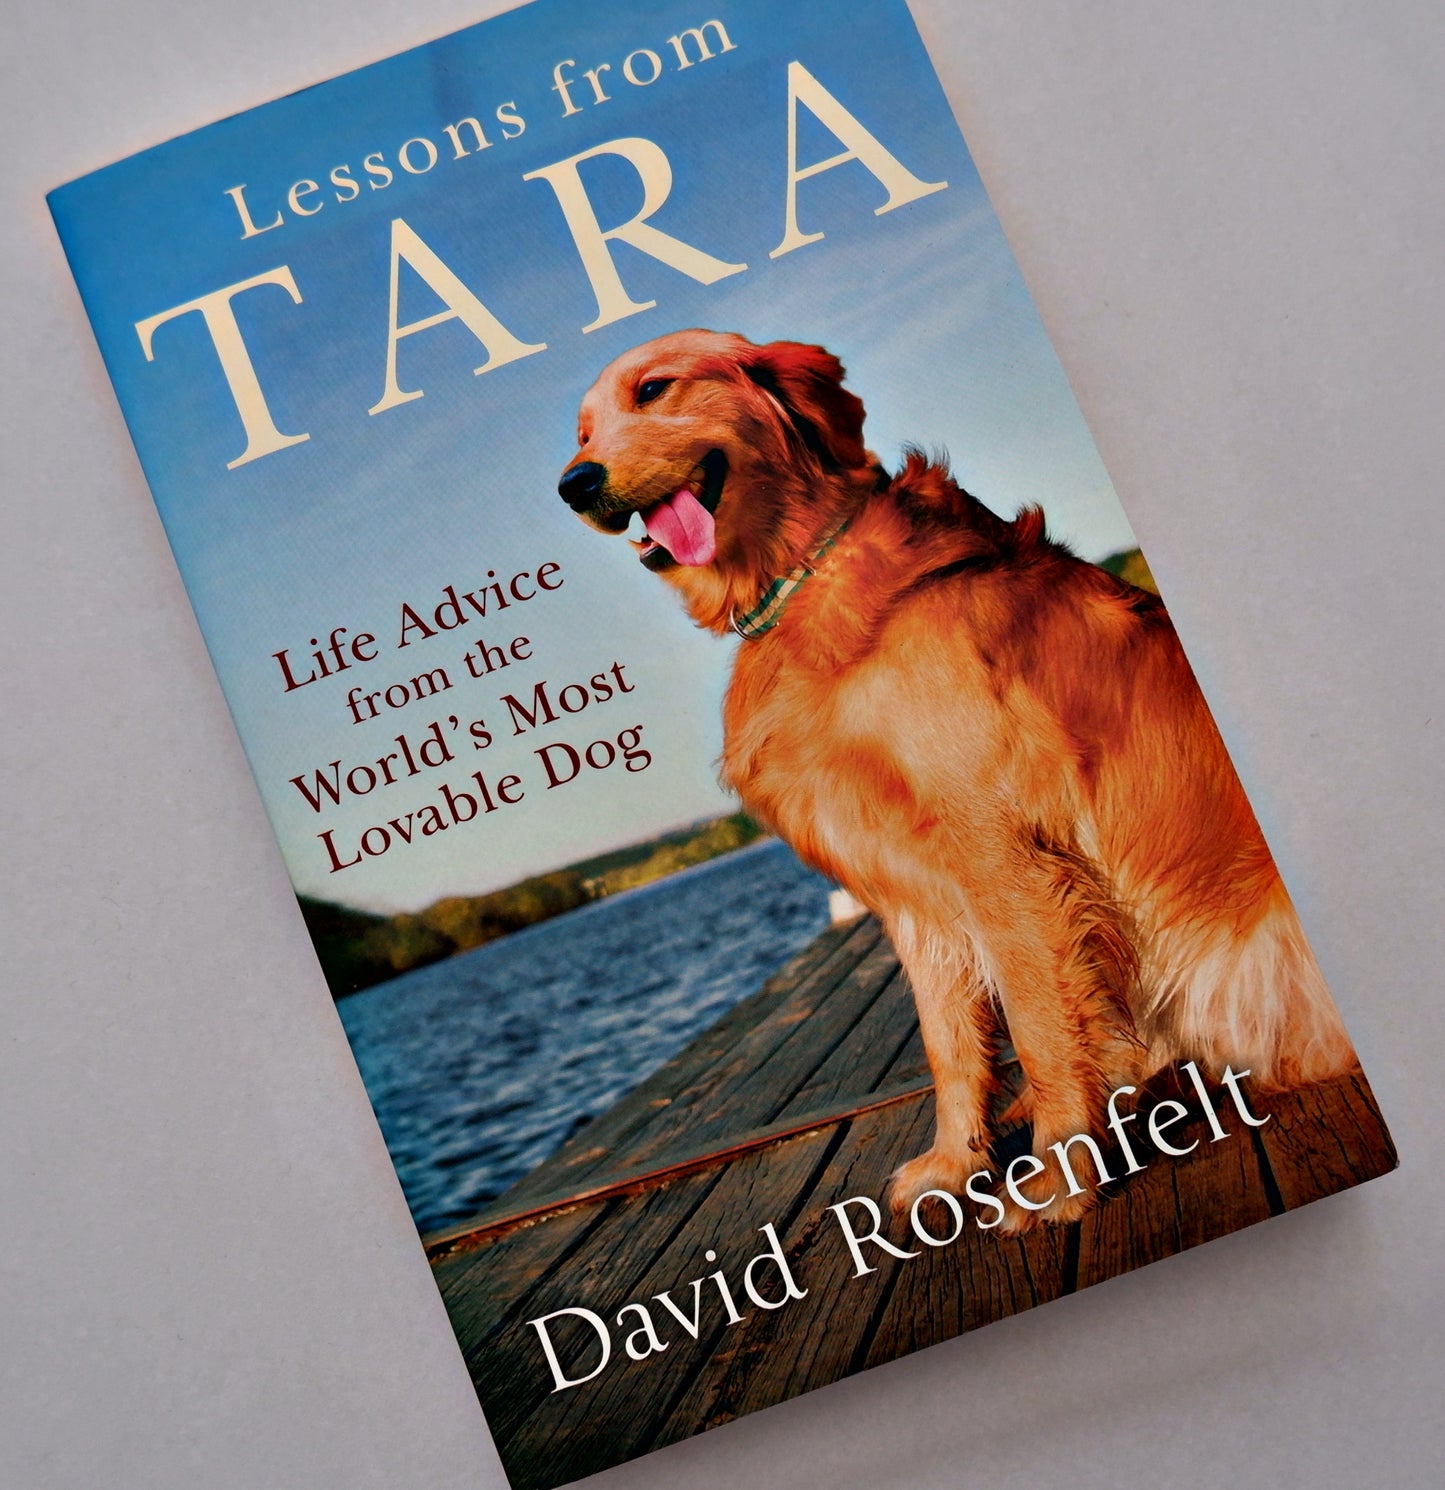 Lessons from Tara: Life Advice from the World's Most Brilliant Dog - David Rosenfelt